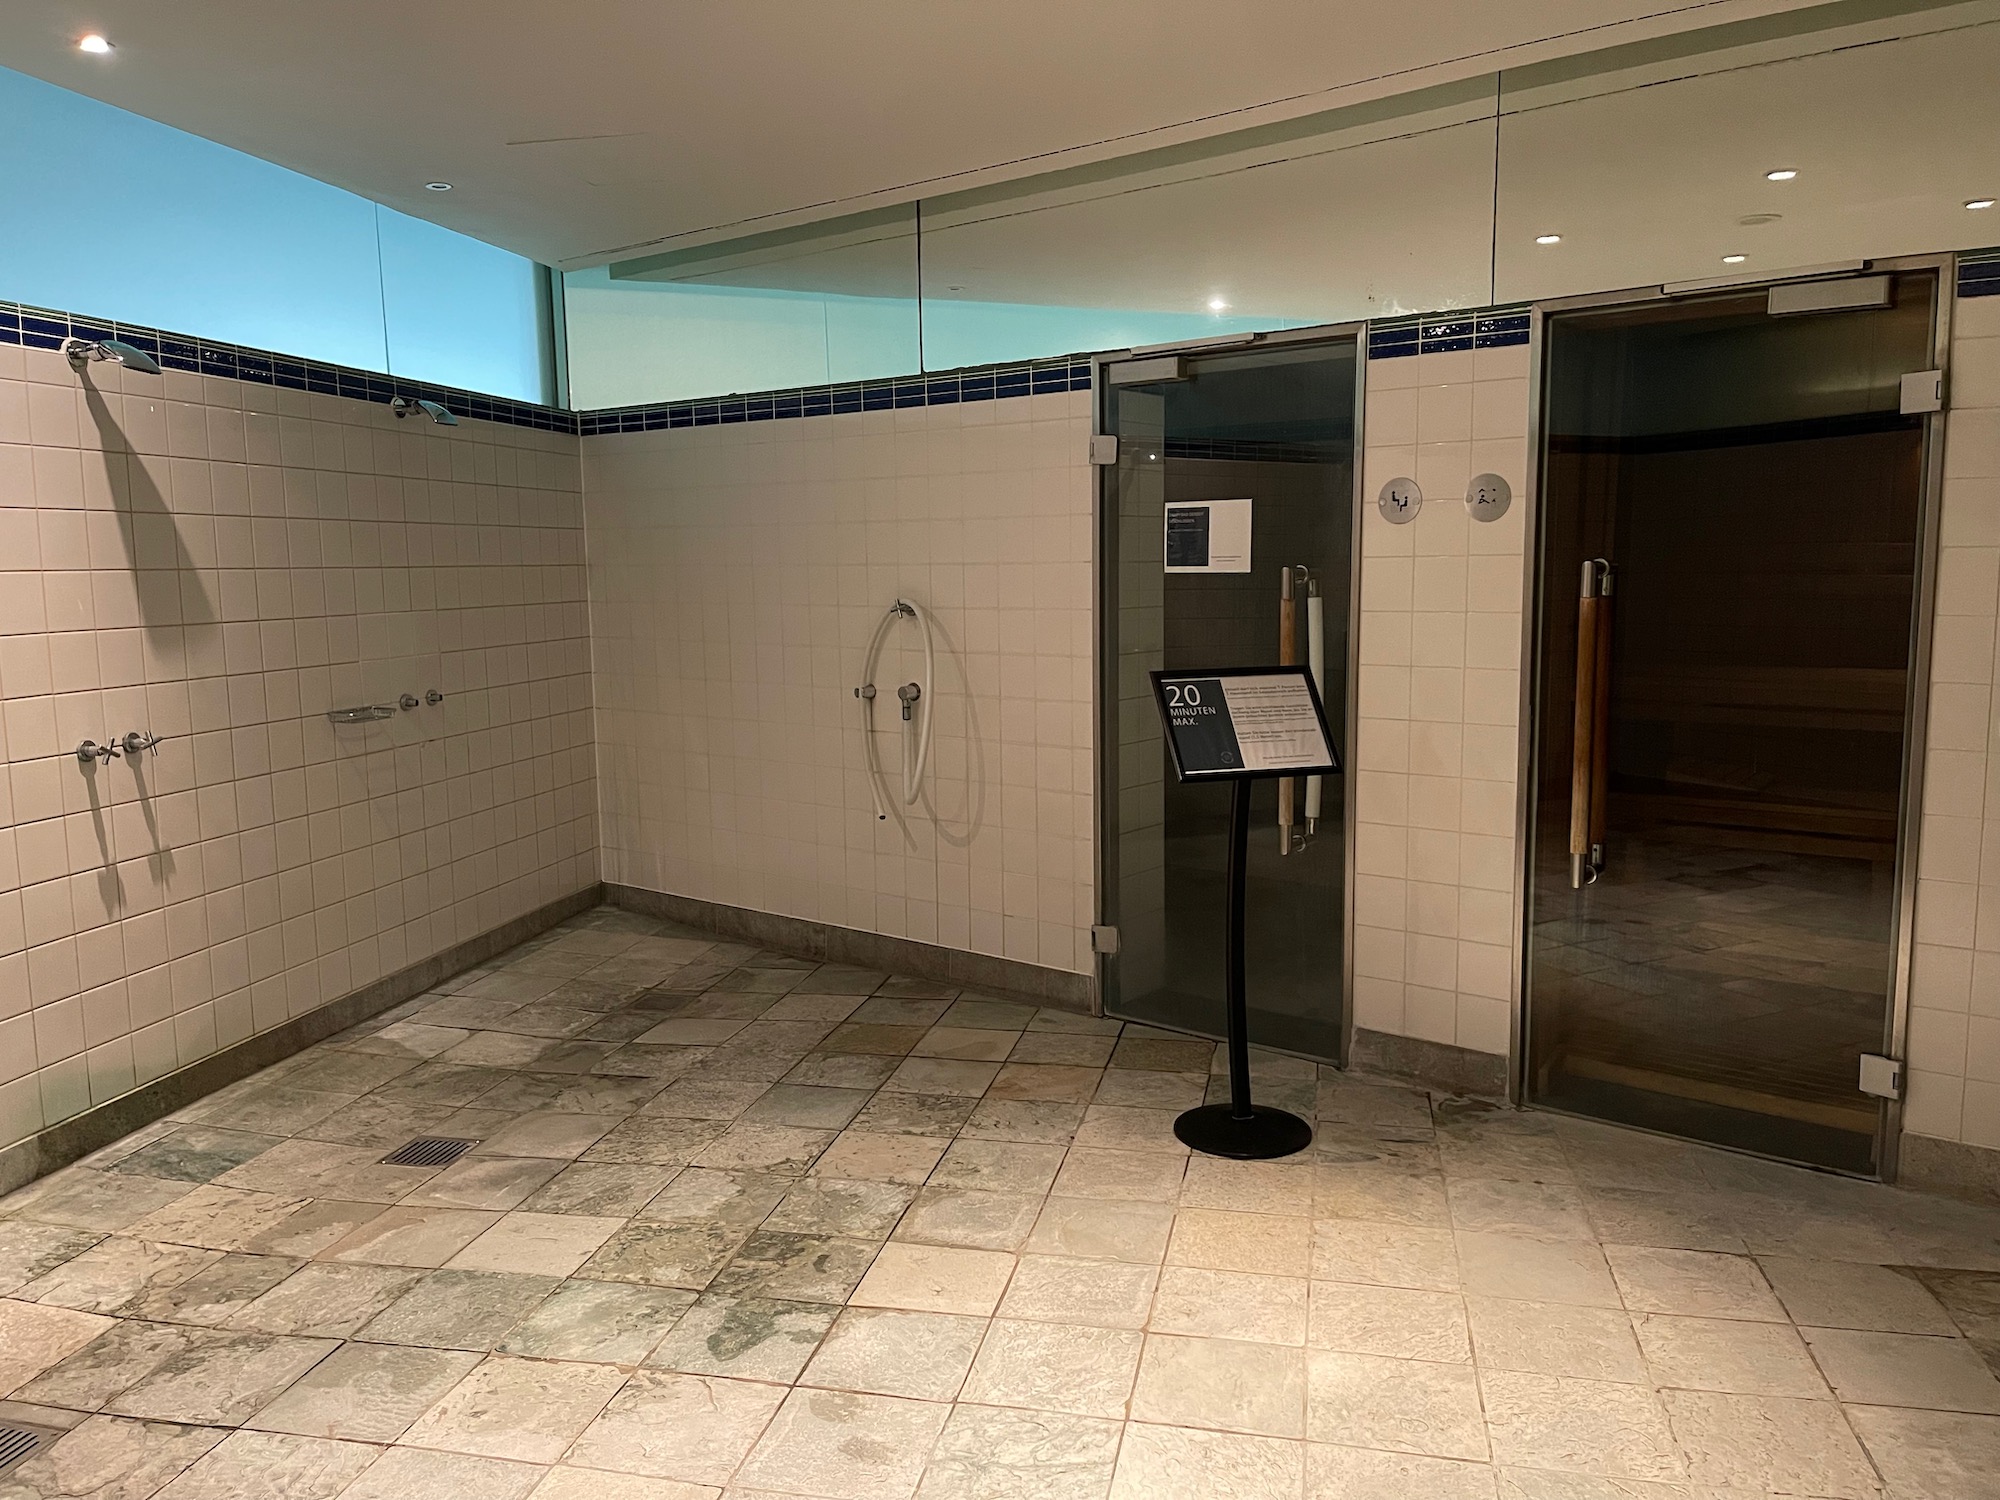 a shower room with a sign and a shower door